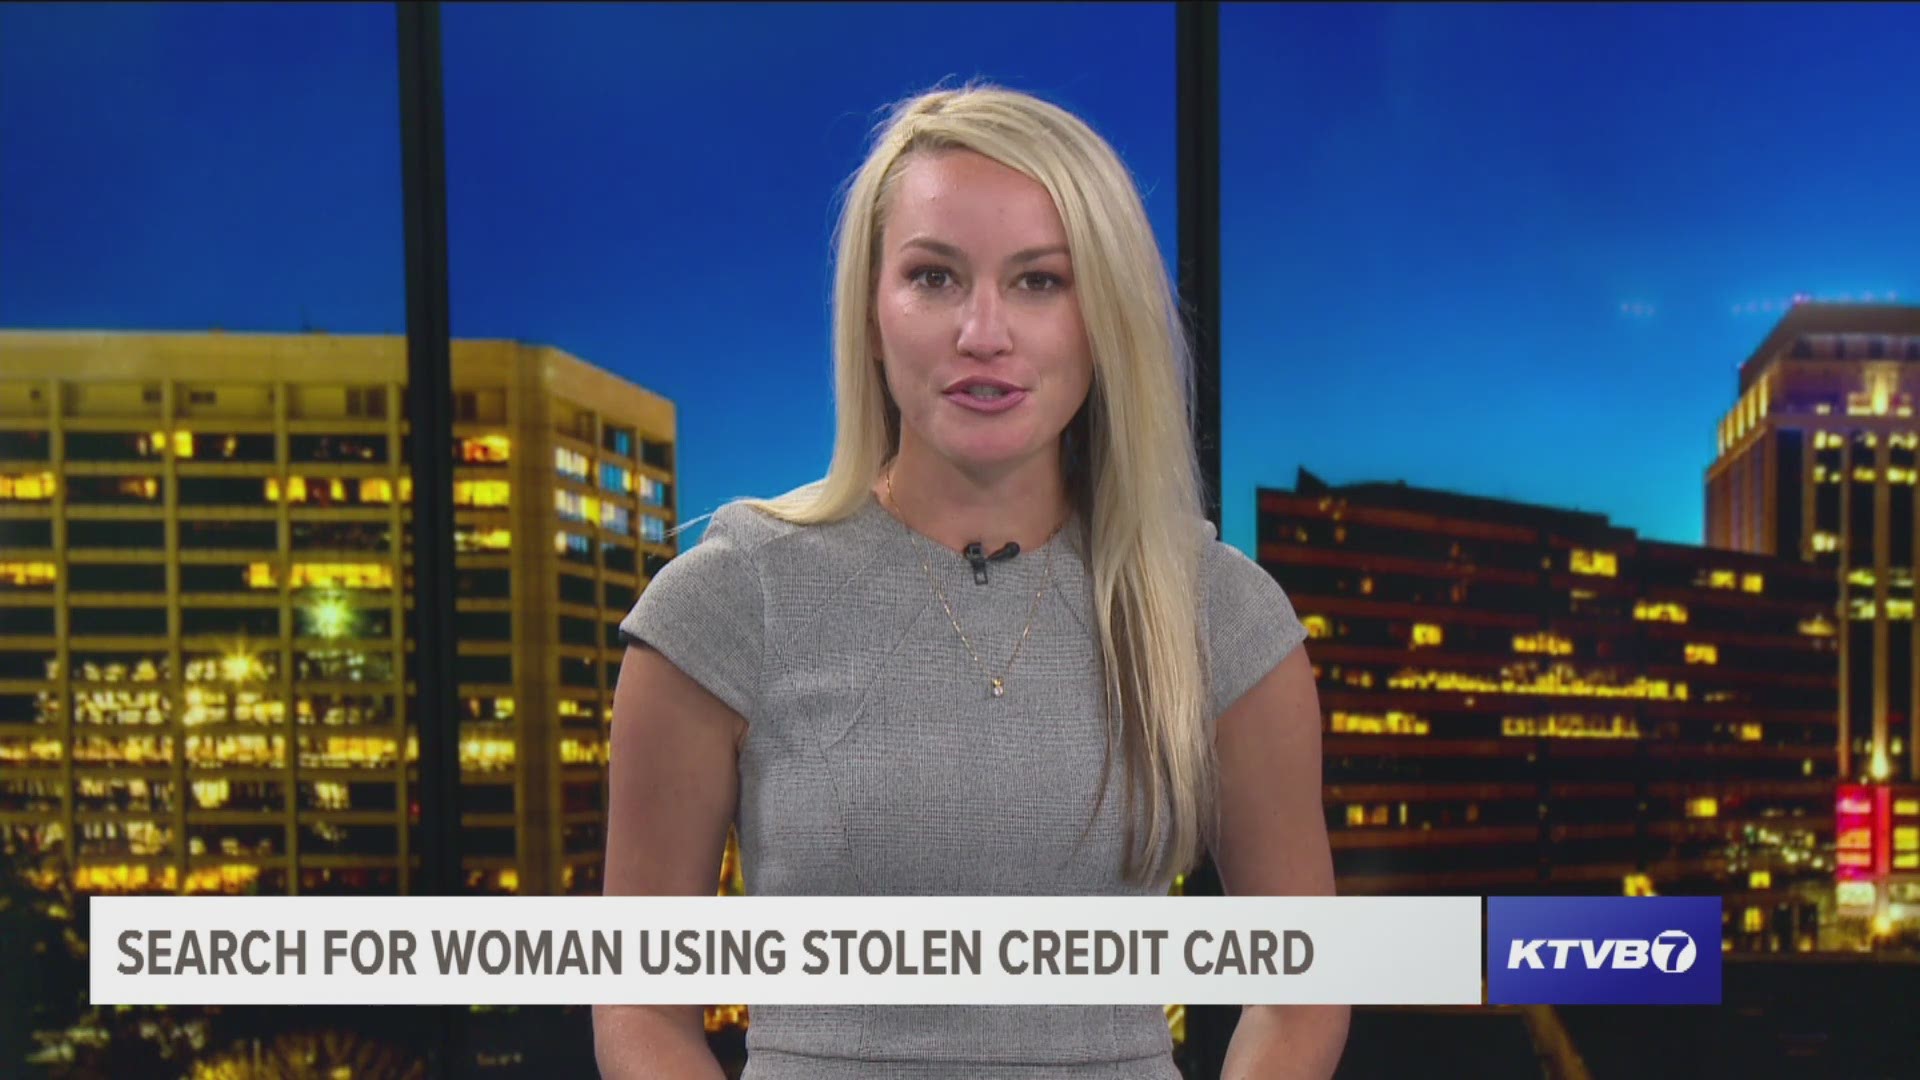 “We don’t know that woman stole those cards, but we do know she's using it at various businesses in Nampa,” Nampa Police Sgt. Becky Doney said.